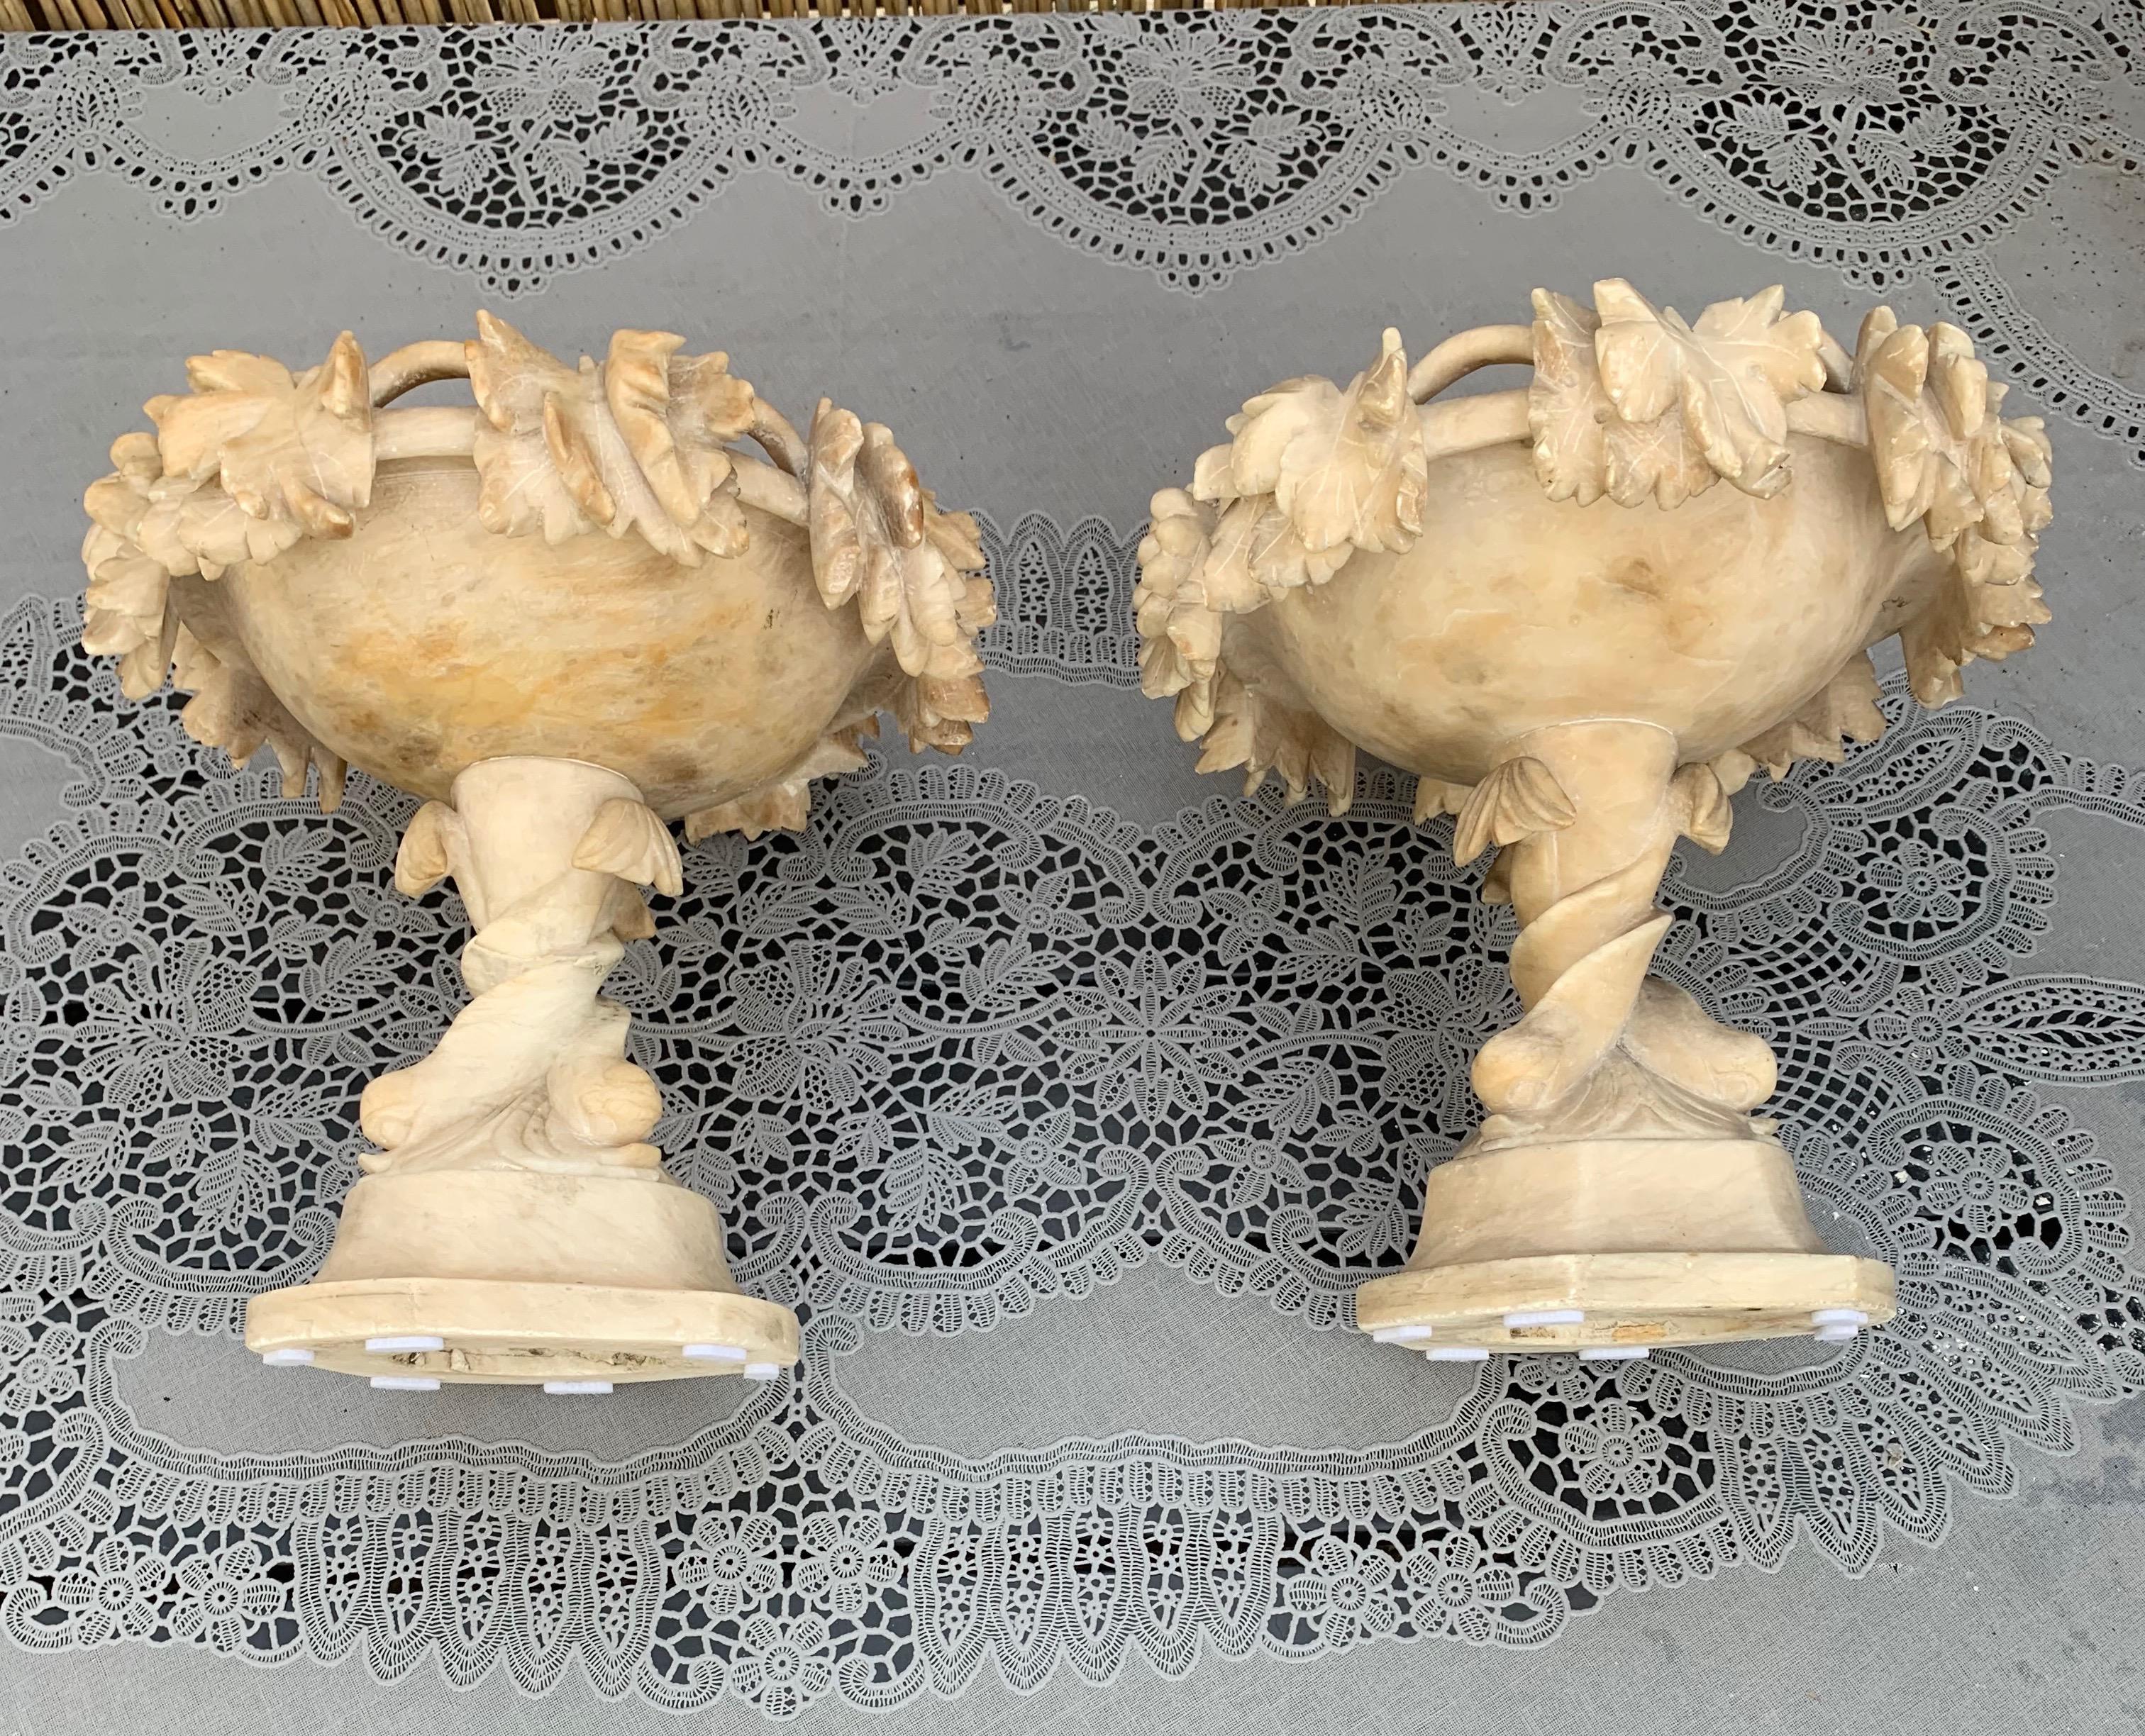 Antique & Rare Pair of Hand Carved Italian Alabaster Tazza Table Display Pieces 13